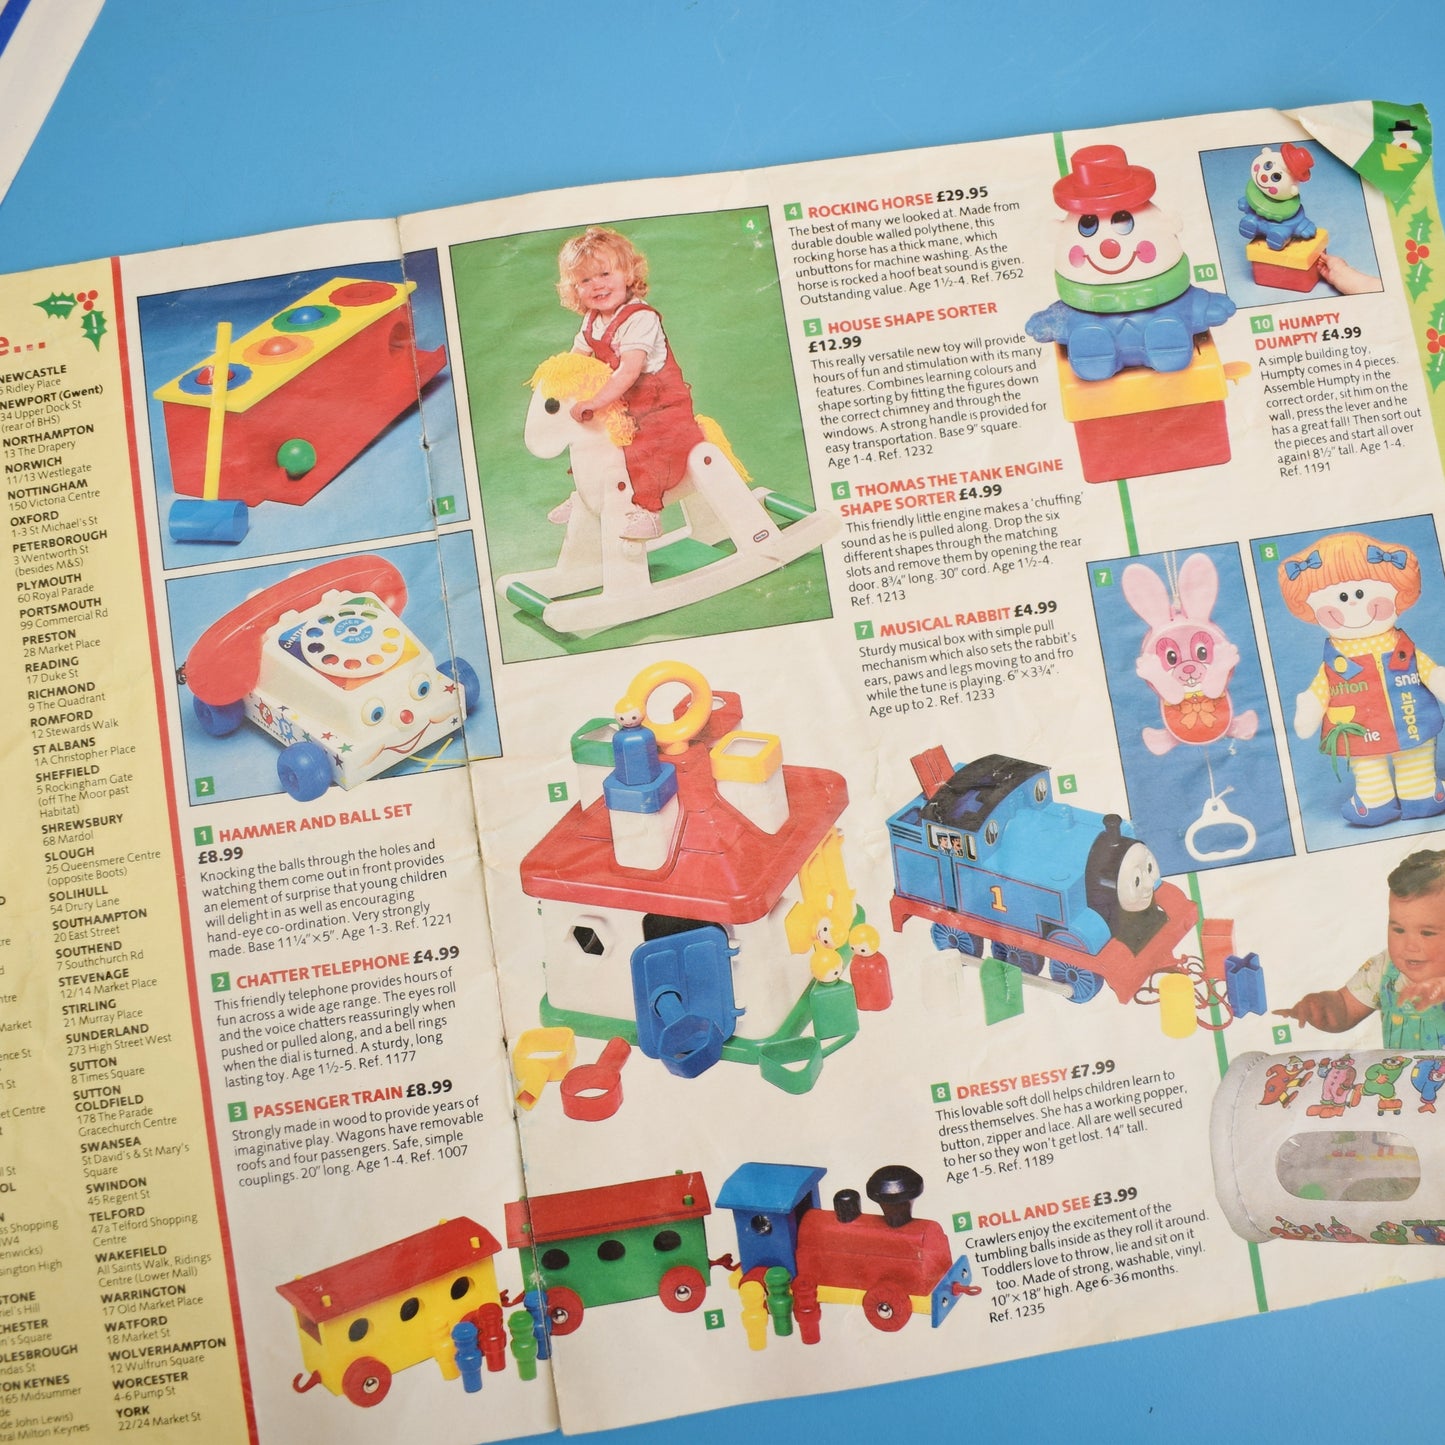 Vintage 1980s Early Learning Centre Catalogues